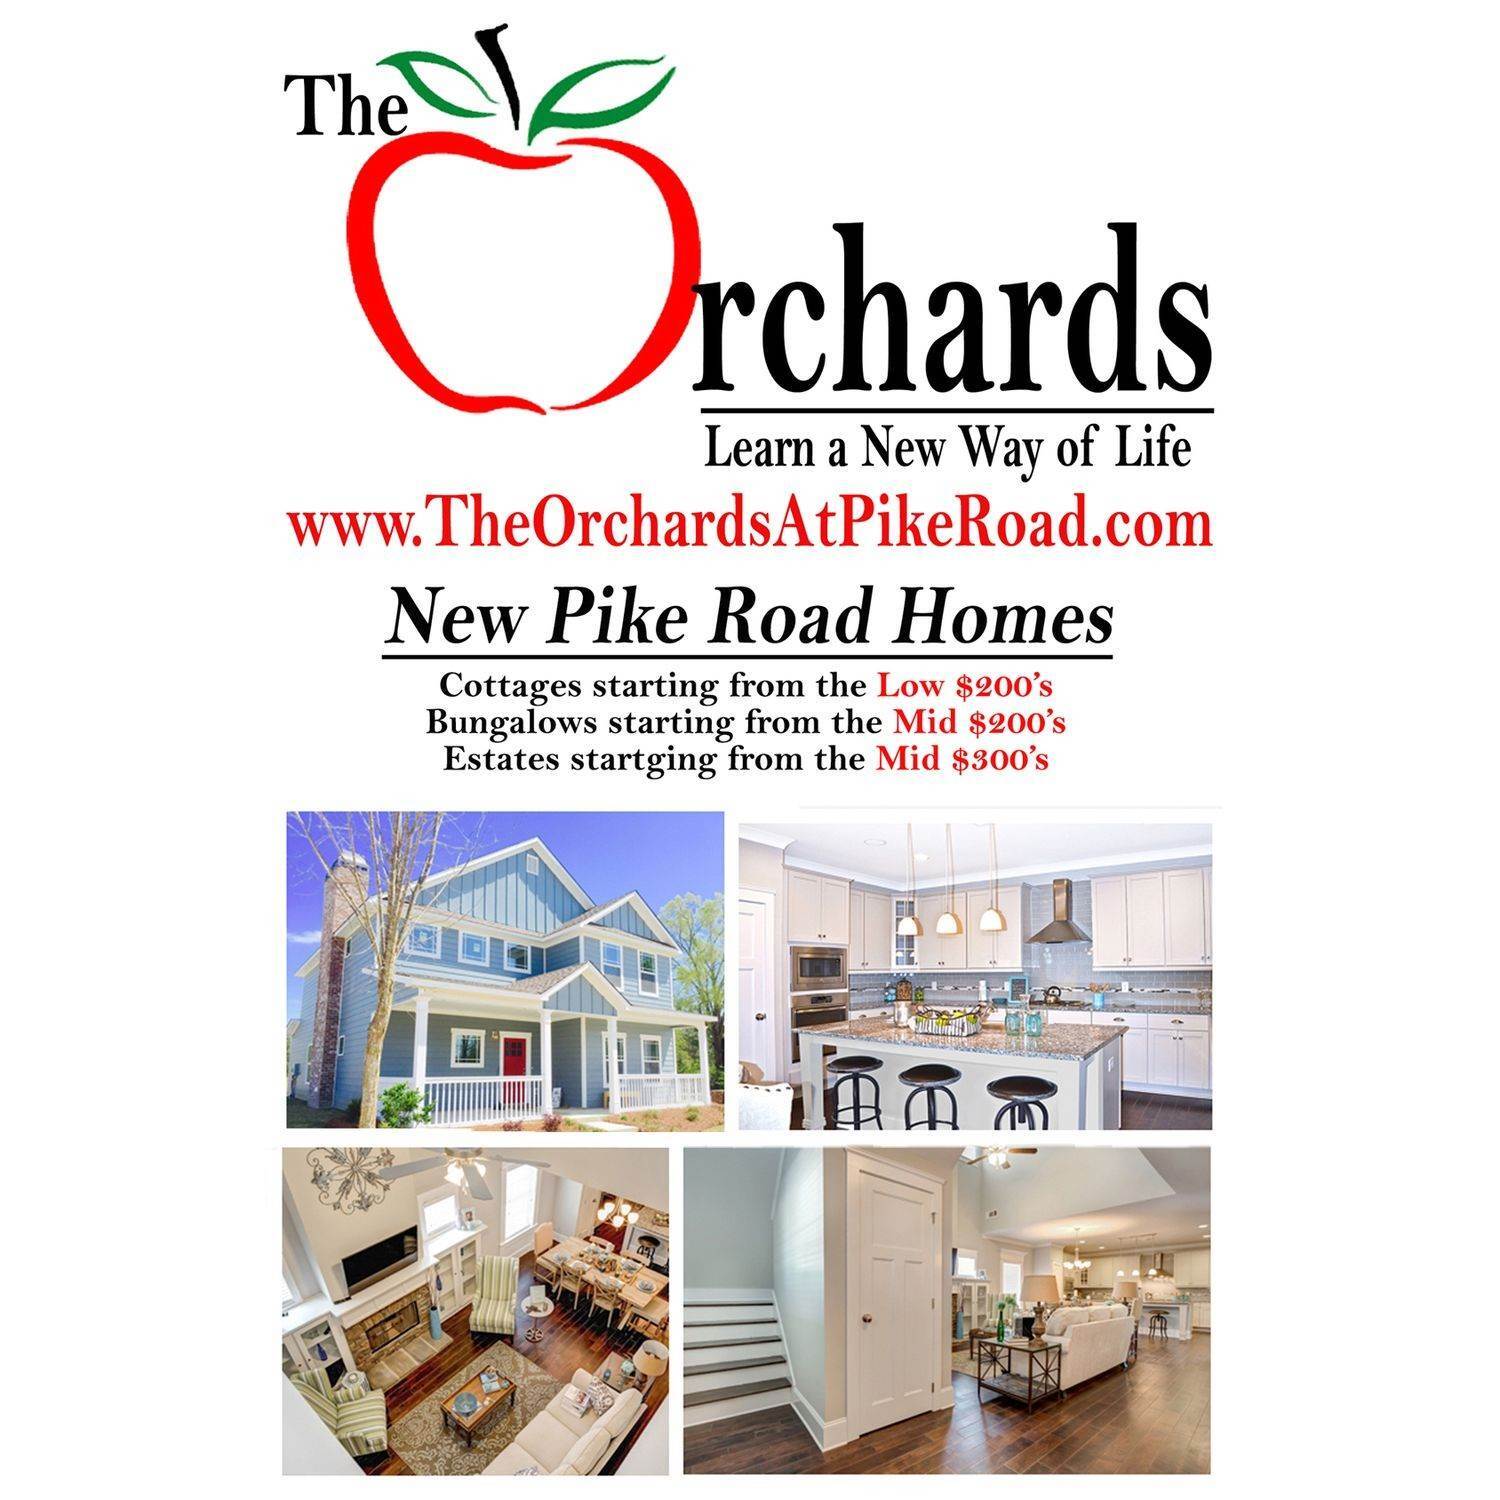 The Orchards at Pike Road xây dựng tại 130 Avenue Of Learning, Pike Road, AL 36064